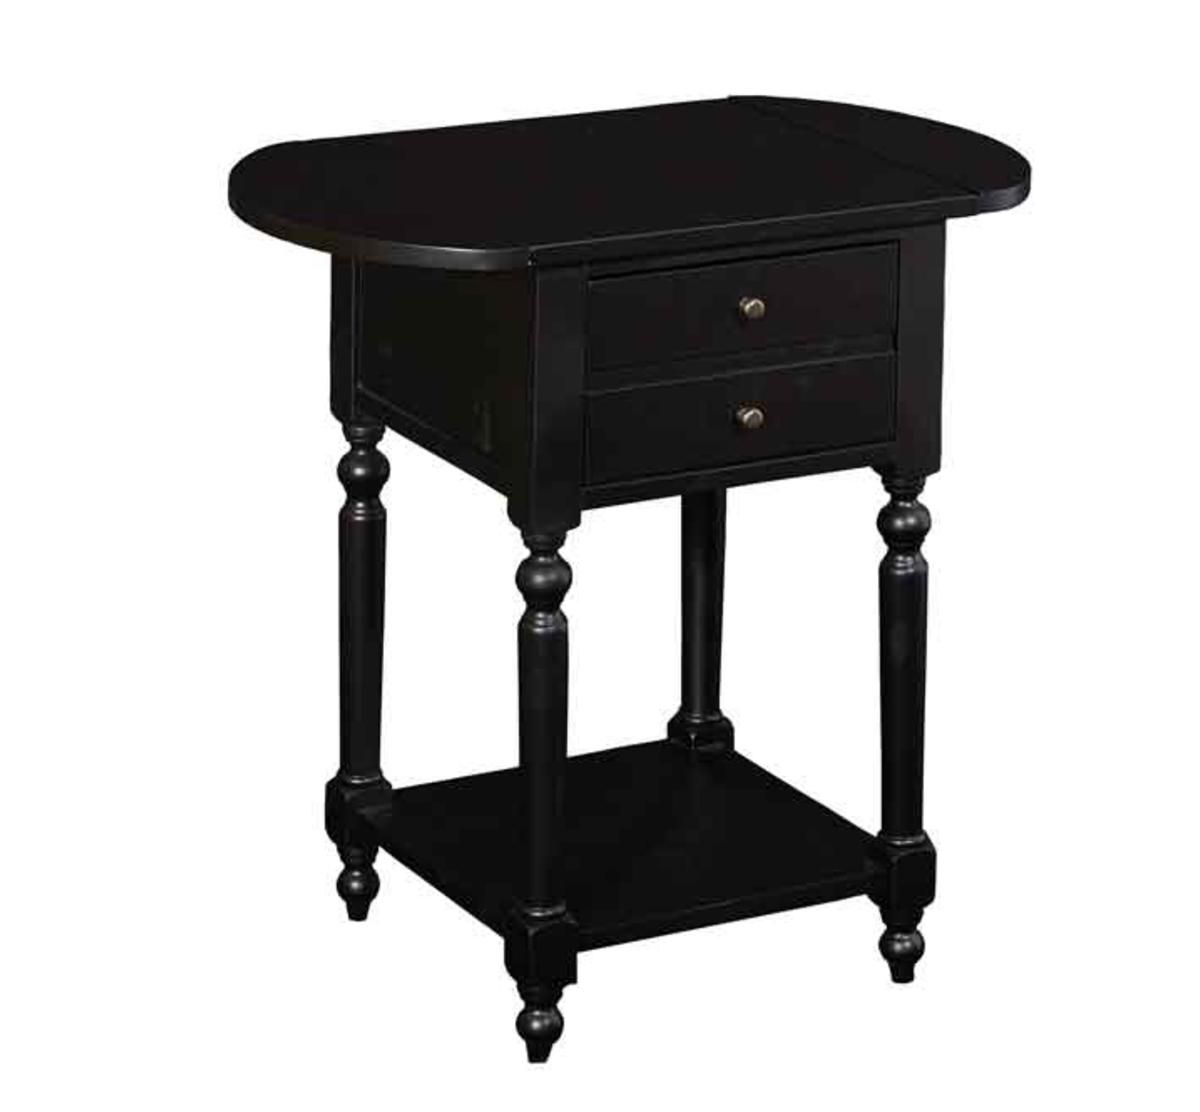 accent table badcock more chest ture bunnings outdoor settings bath and beyond registry login beverage tub with stand target threshold side antique round pedestal drum throne for